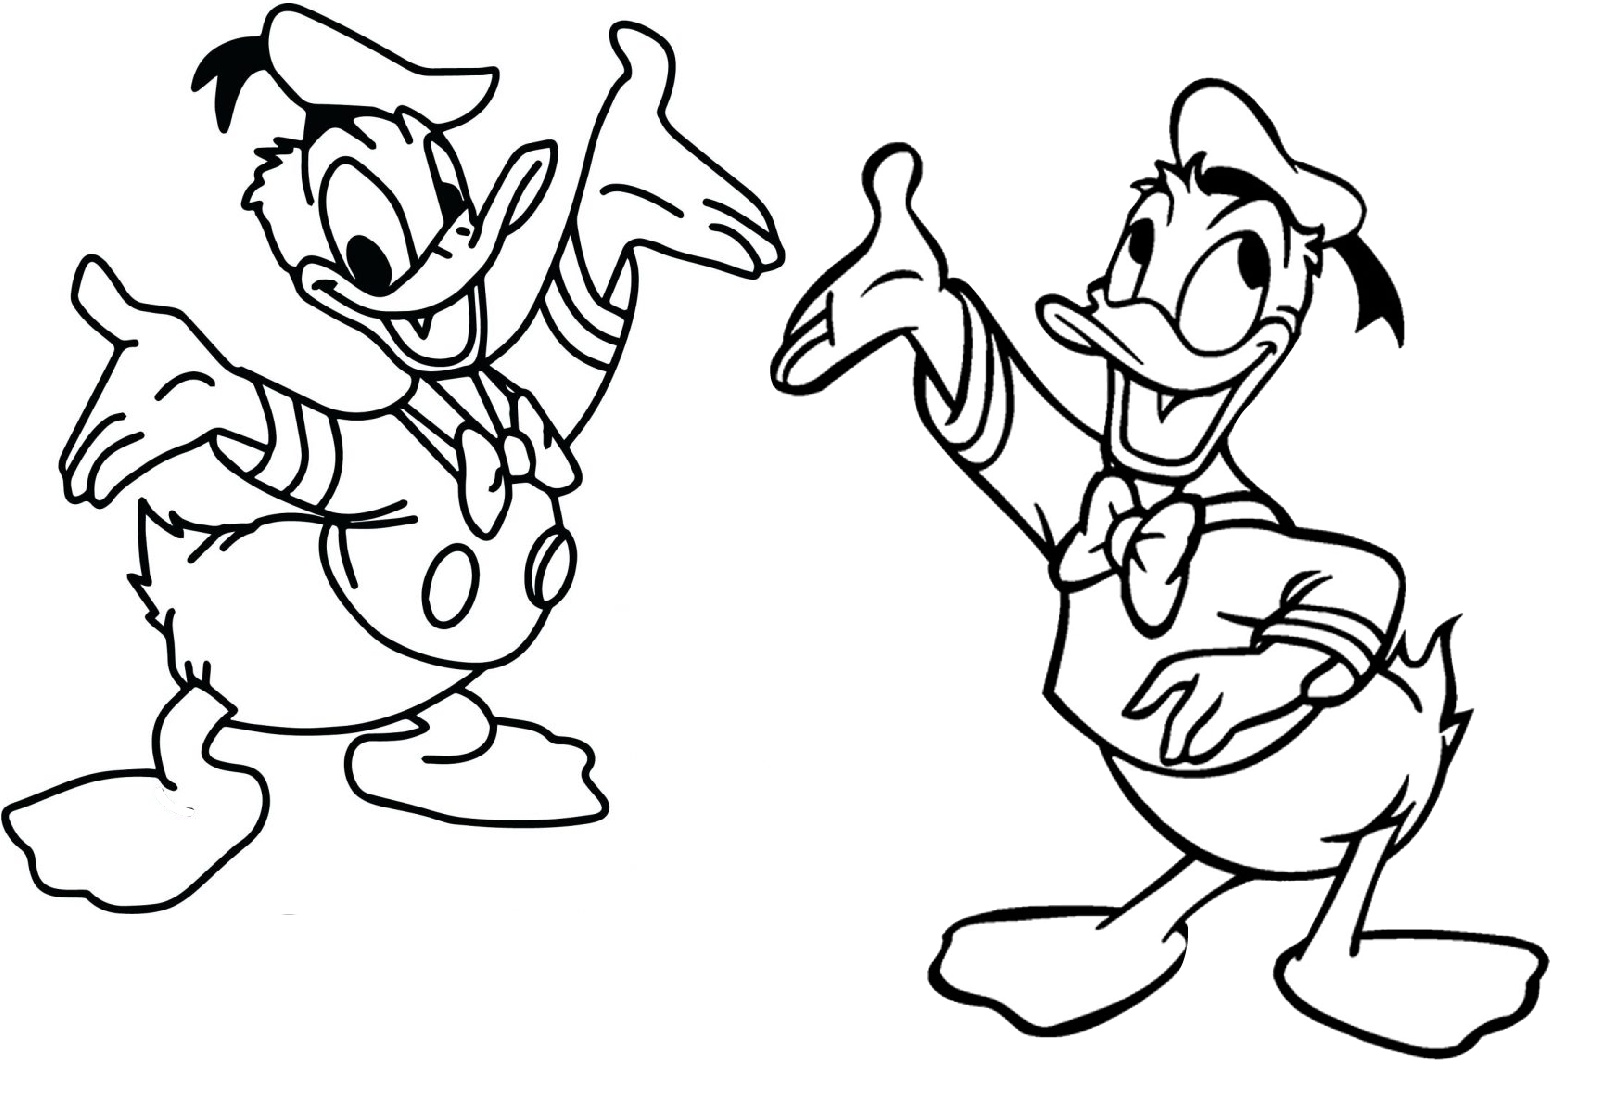 Donald Duck Coloring Pages Disney Printable Coloring Sheets